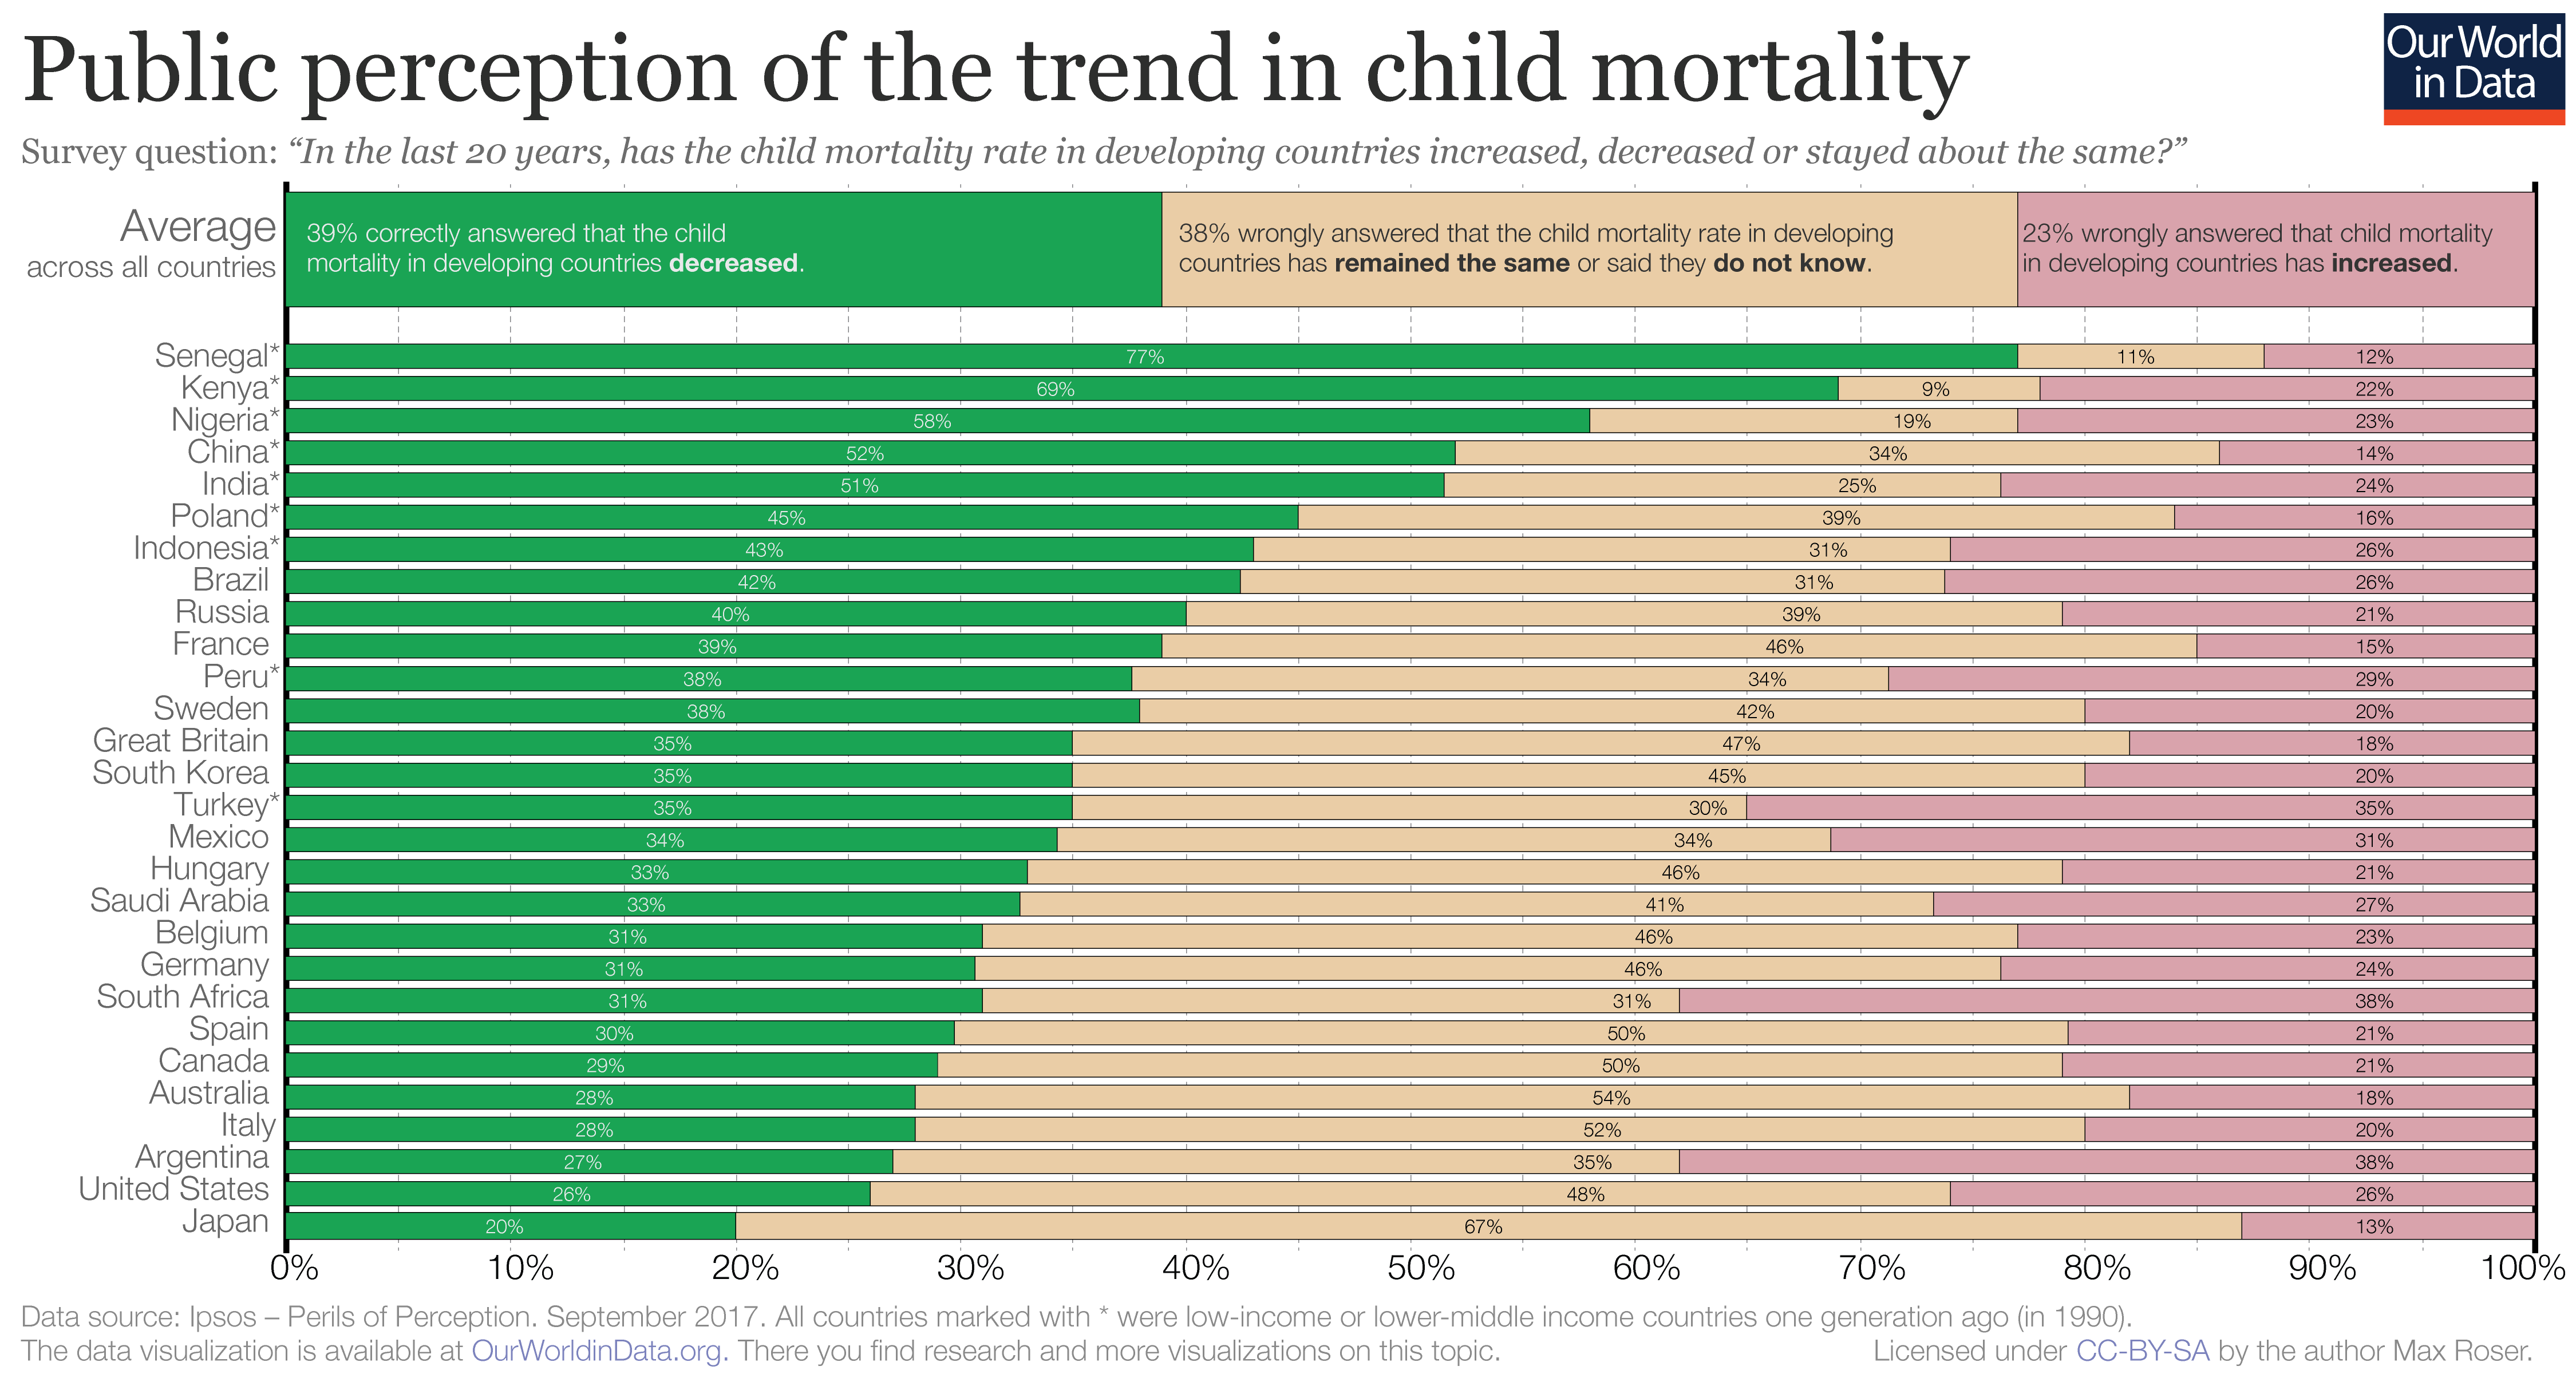 Stacked bar chart of the share of people that think global child mortality has got better or worse, showing that most people incorrectly think it has stayed the same or gotten worse.